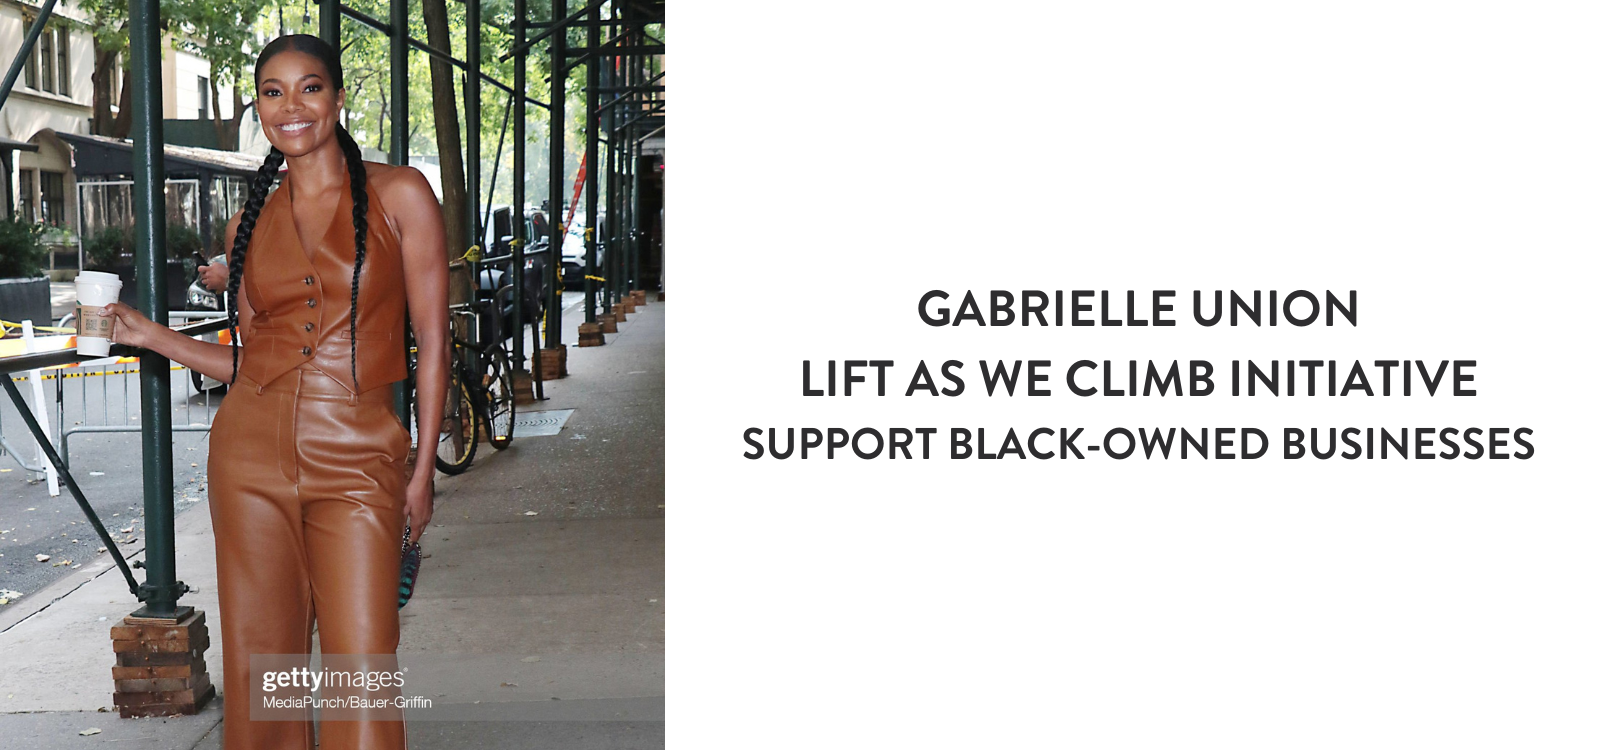 Gabrielle Union Brand Launches ‘Lift As We Climb’ Initiative to Support Black-Owned Businesses